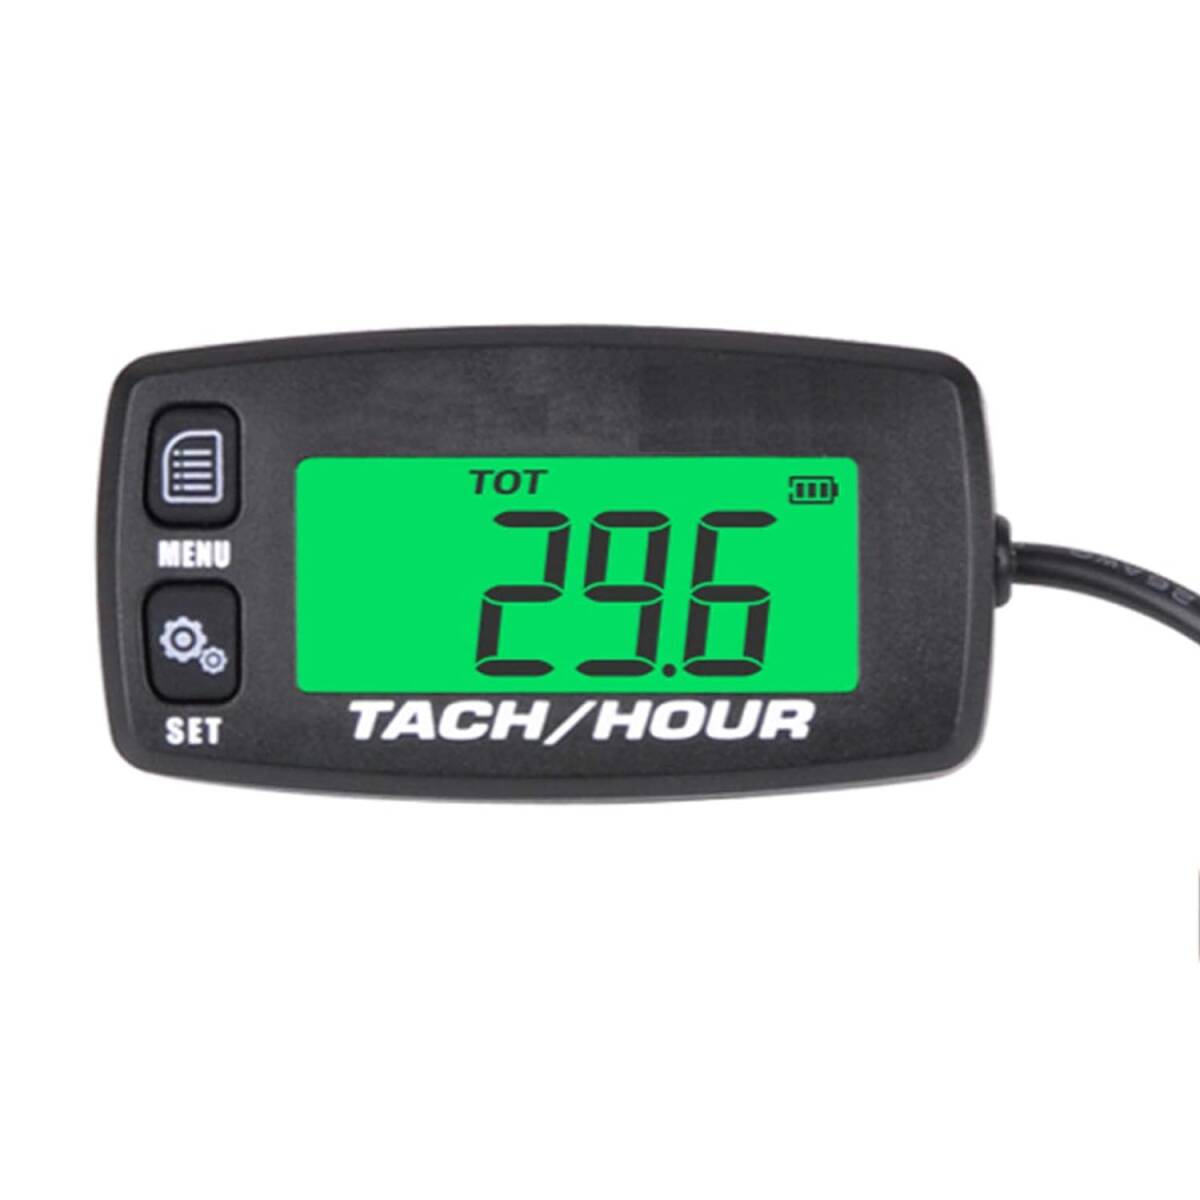  digital tachometer bike engine tachometer put on . easy seems to be . general purpose . high mower * snowblower etc.. industry for engine ., other two wheel 